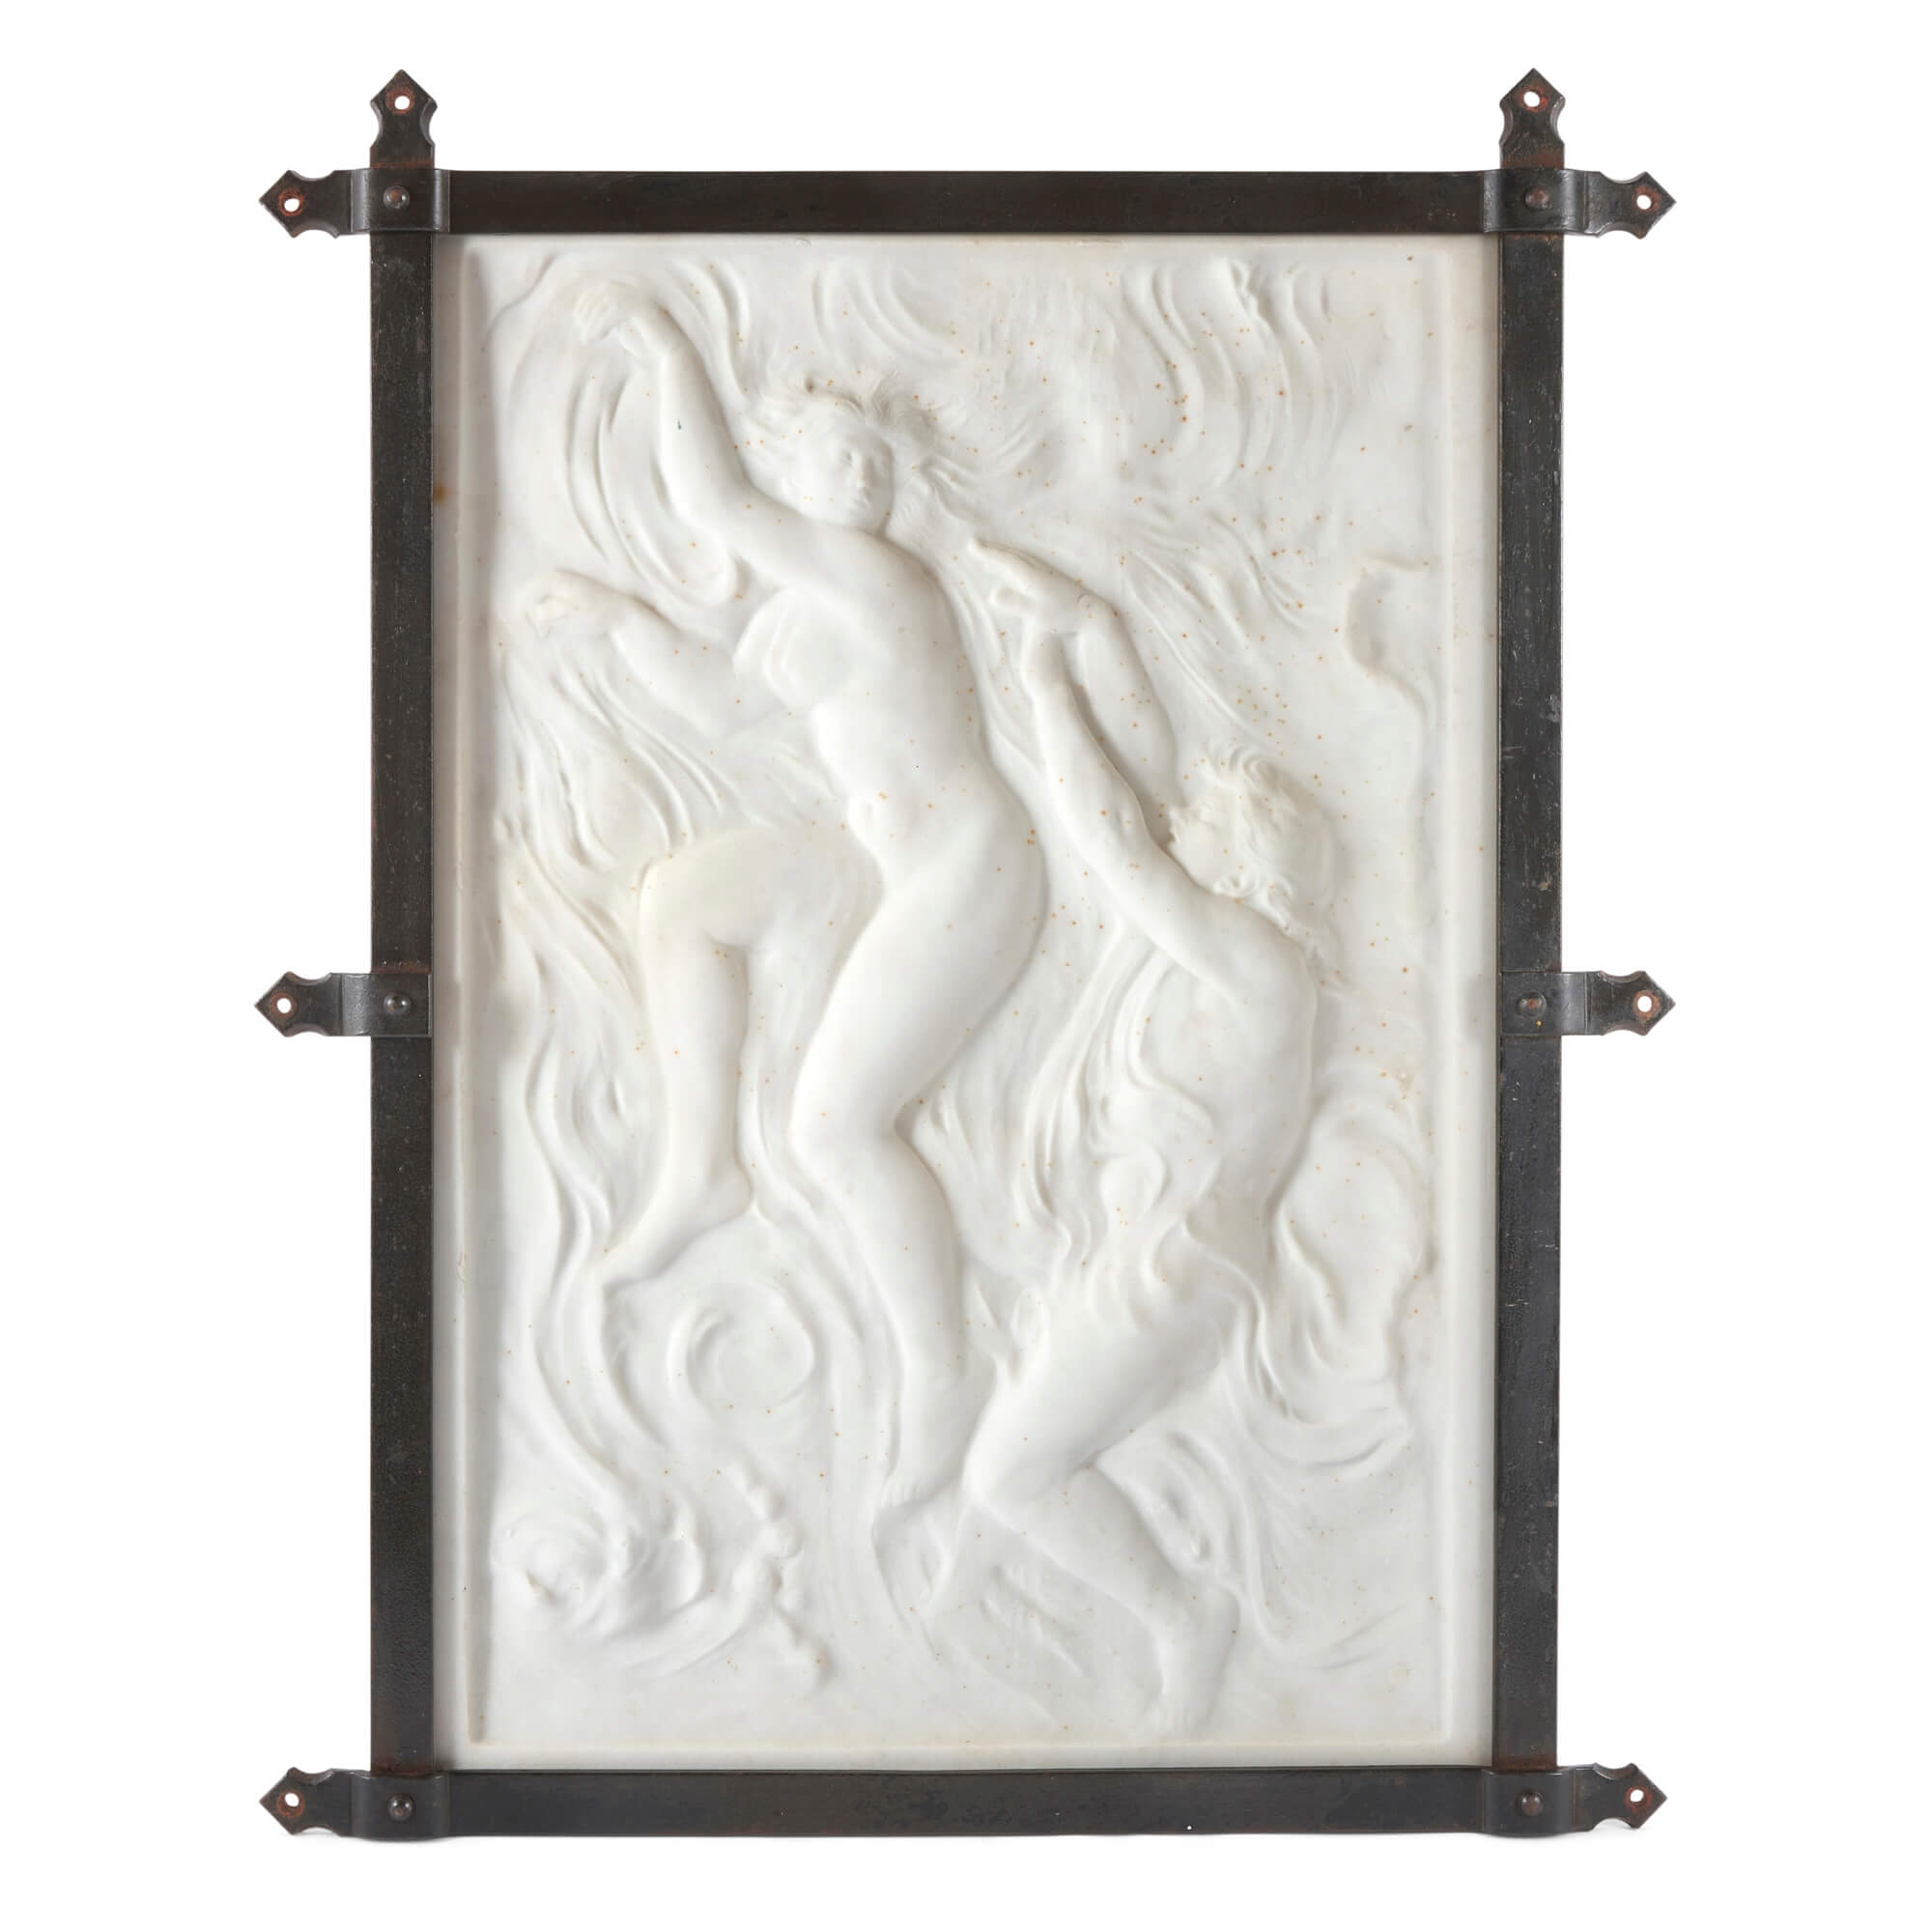 Large Marble Figurative Relief Panel by Pegram For Sale